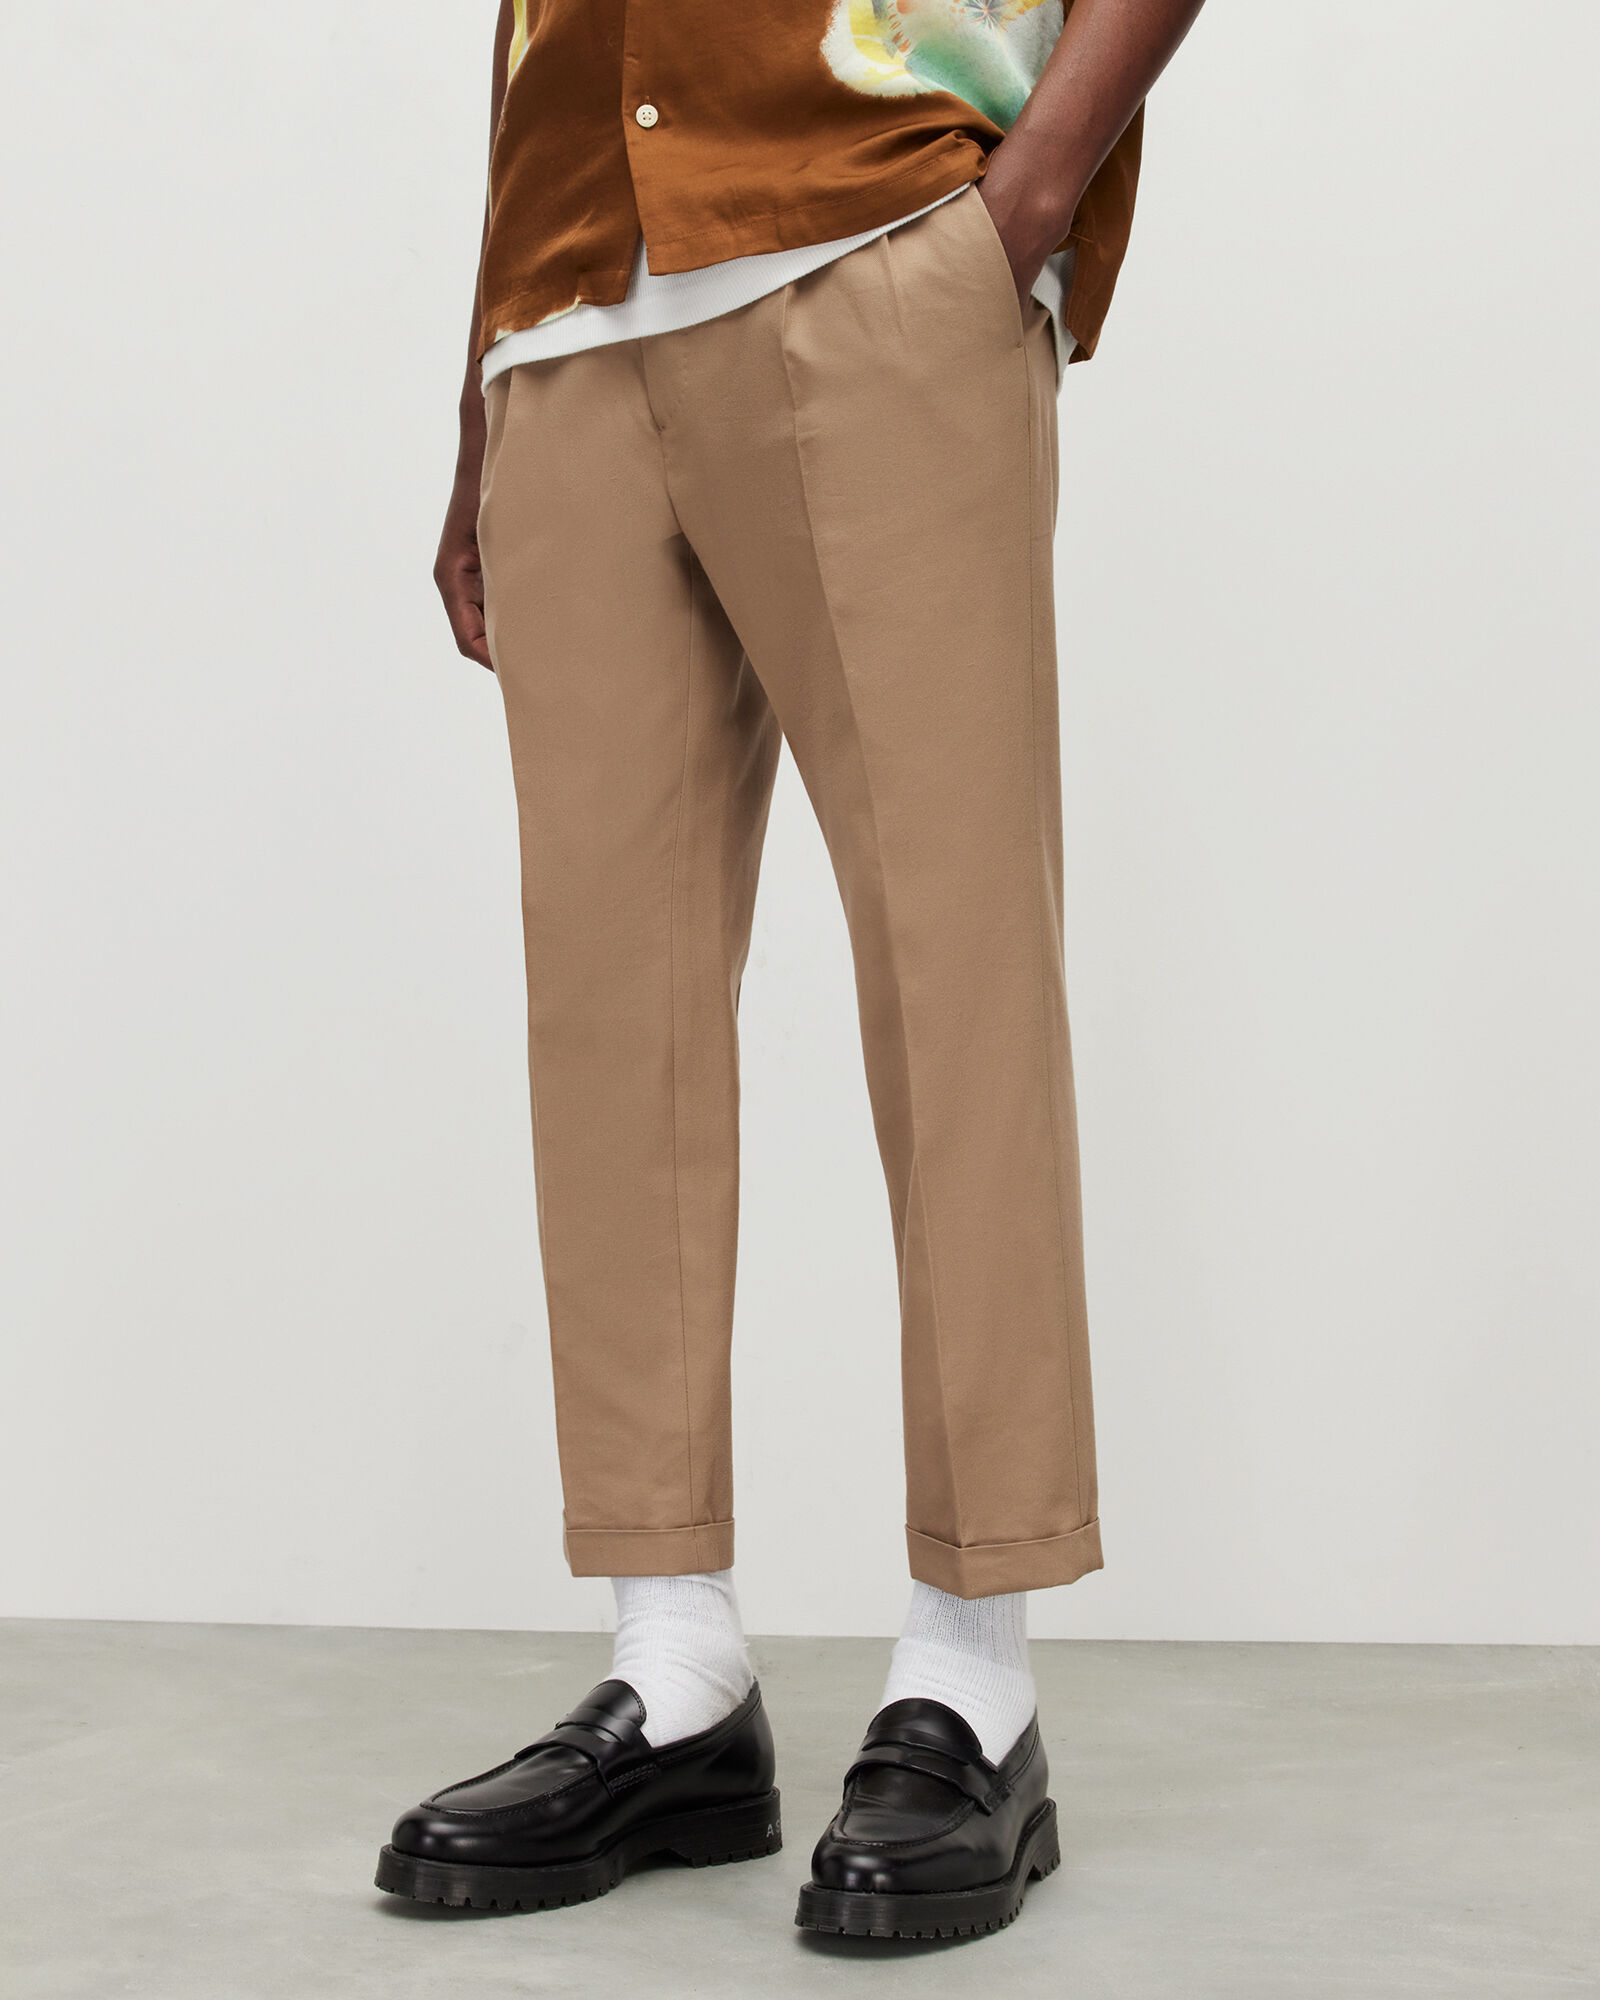 Gap Mens Cargo Trousers Sale 59 OFF 57 OFF